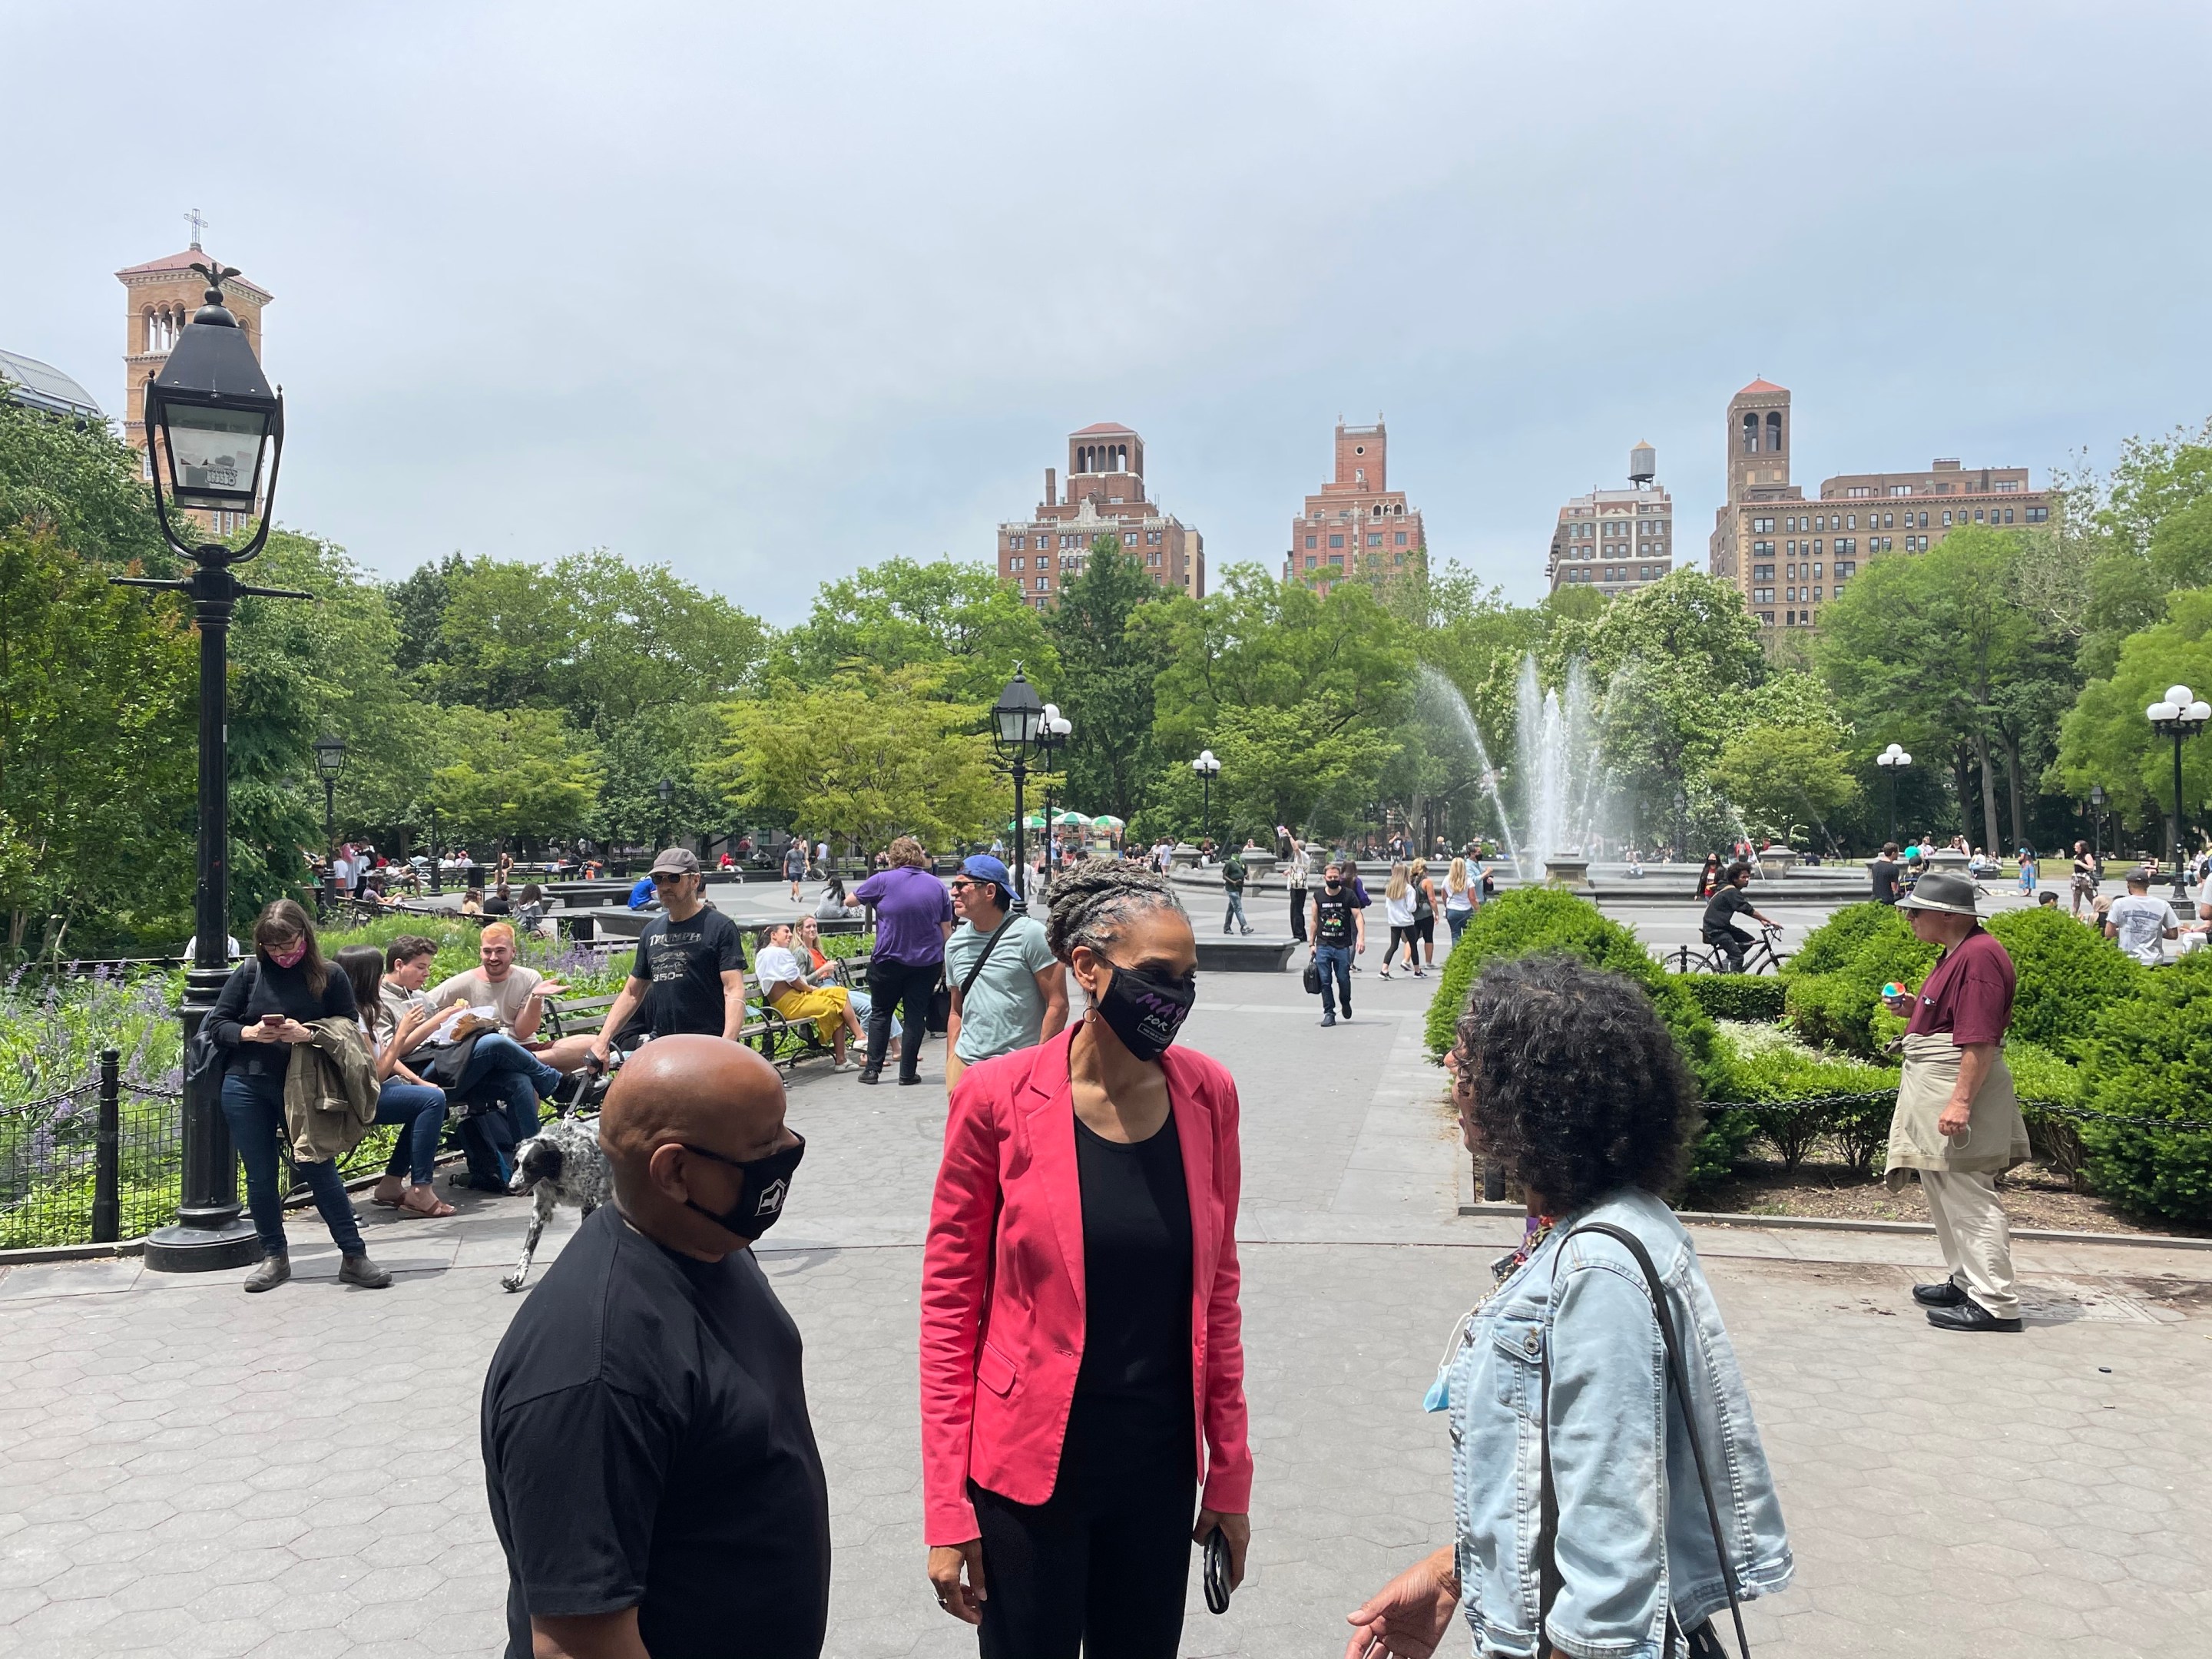 Mayoral candidate Maya Wiley talks to supporters in Washington Square Park on Tuesday afternoon, in front of the large fountain.